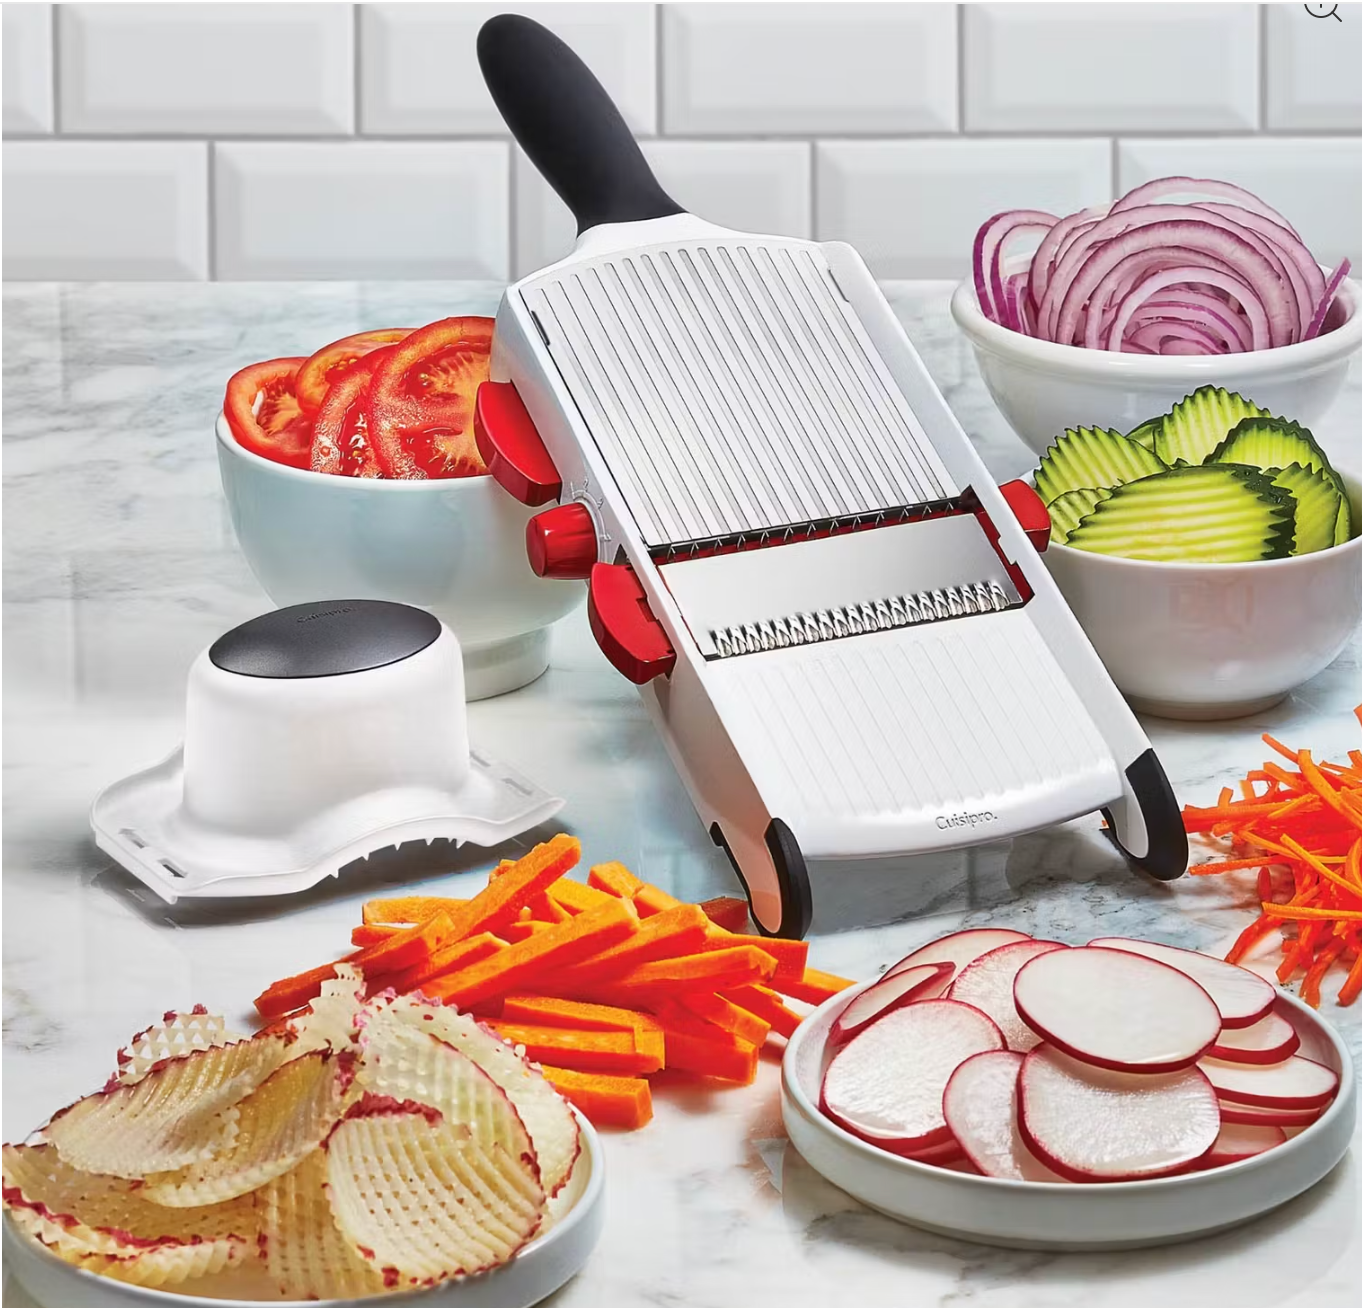  NVTED Luncheon Meat Slicer, Boiled Egg Fruit Soft Cheese Slicer  Cutter, Stainless Steel Wires, Cuts 10 Slices (White) : Home & Kitchen